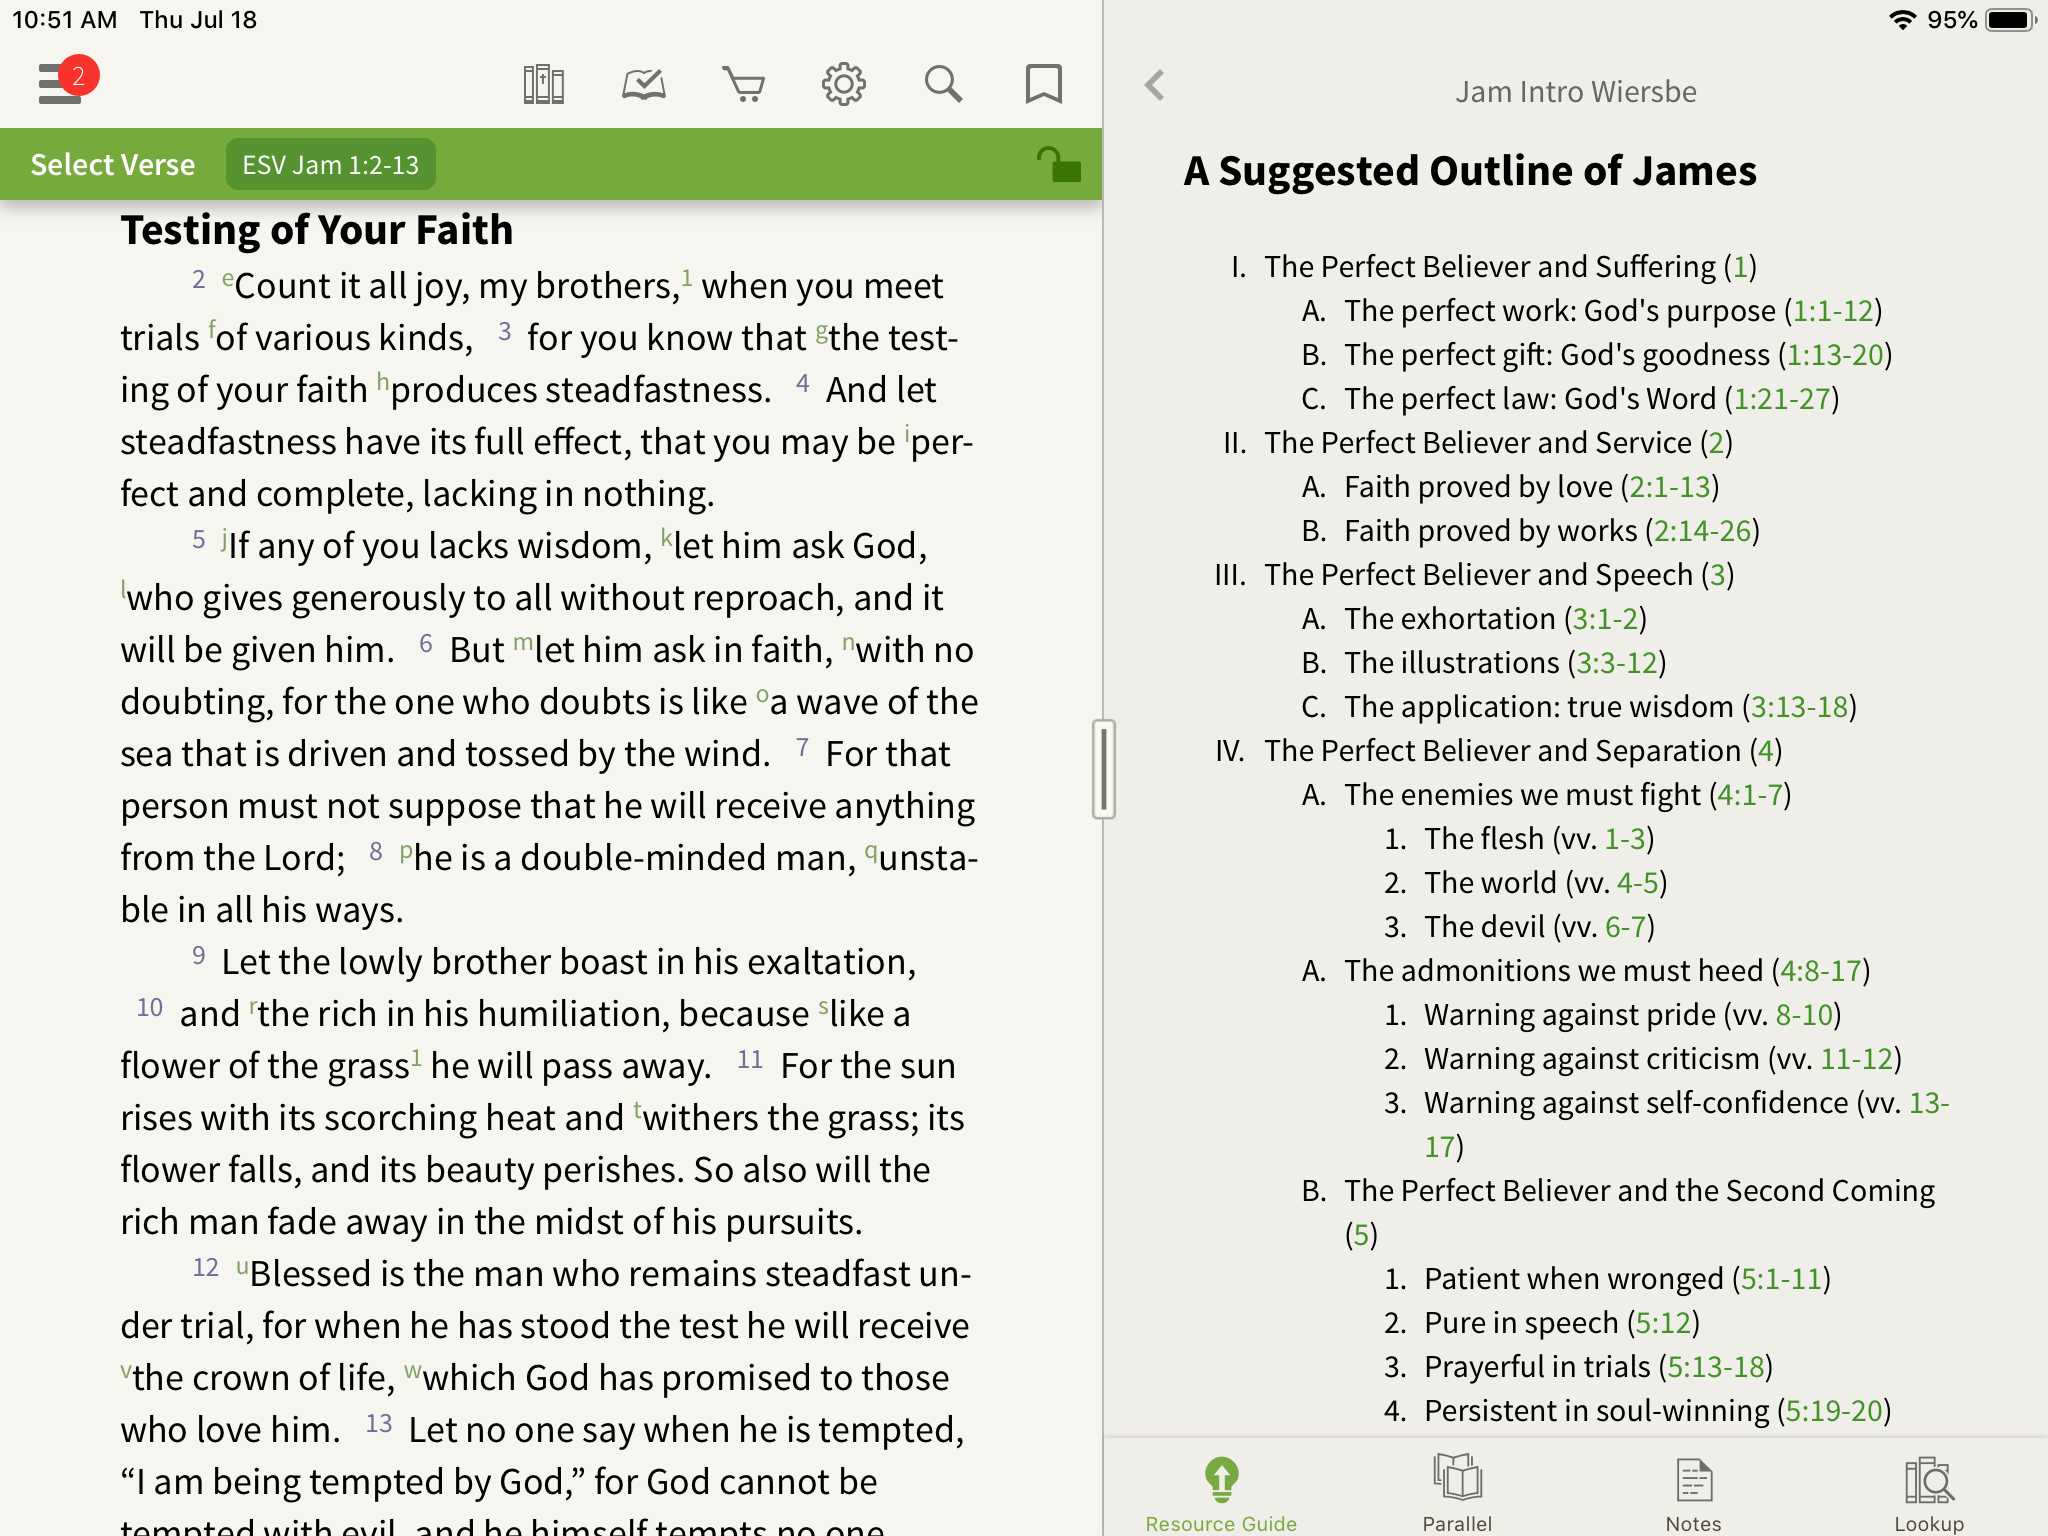 Wiesrbe Expository Outlines in the Olive Tree Bible App